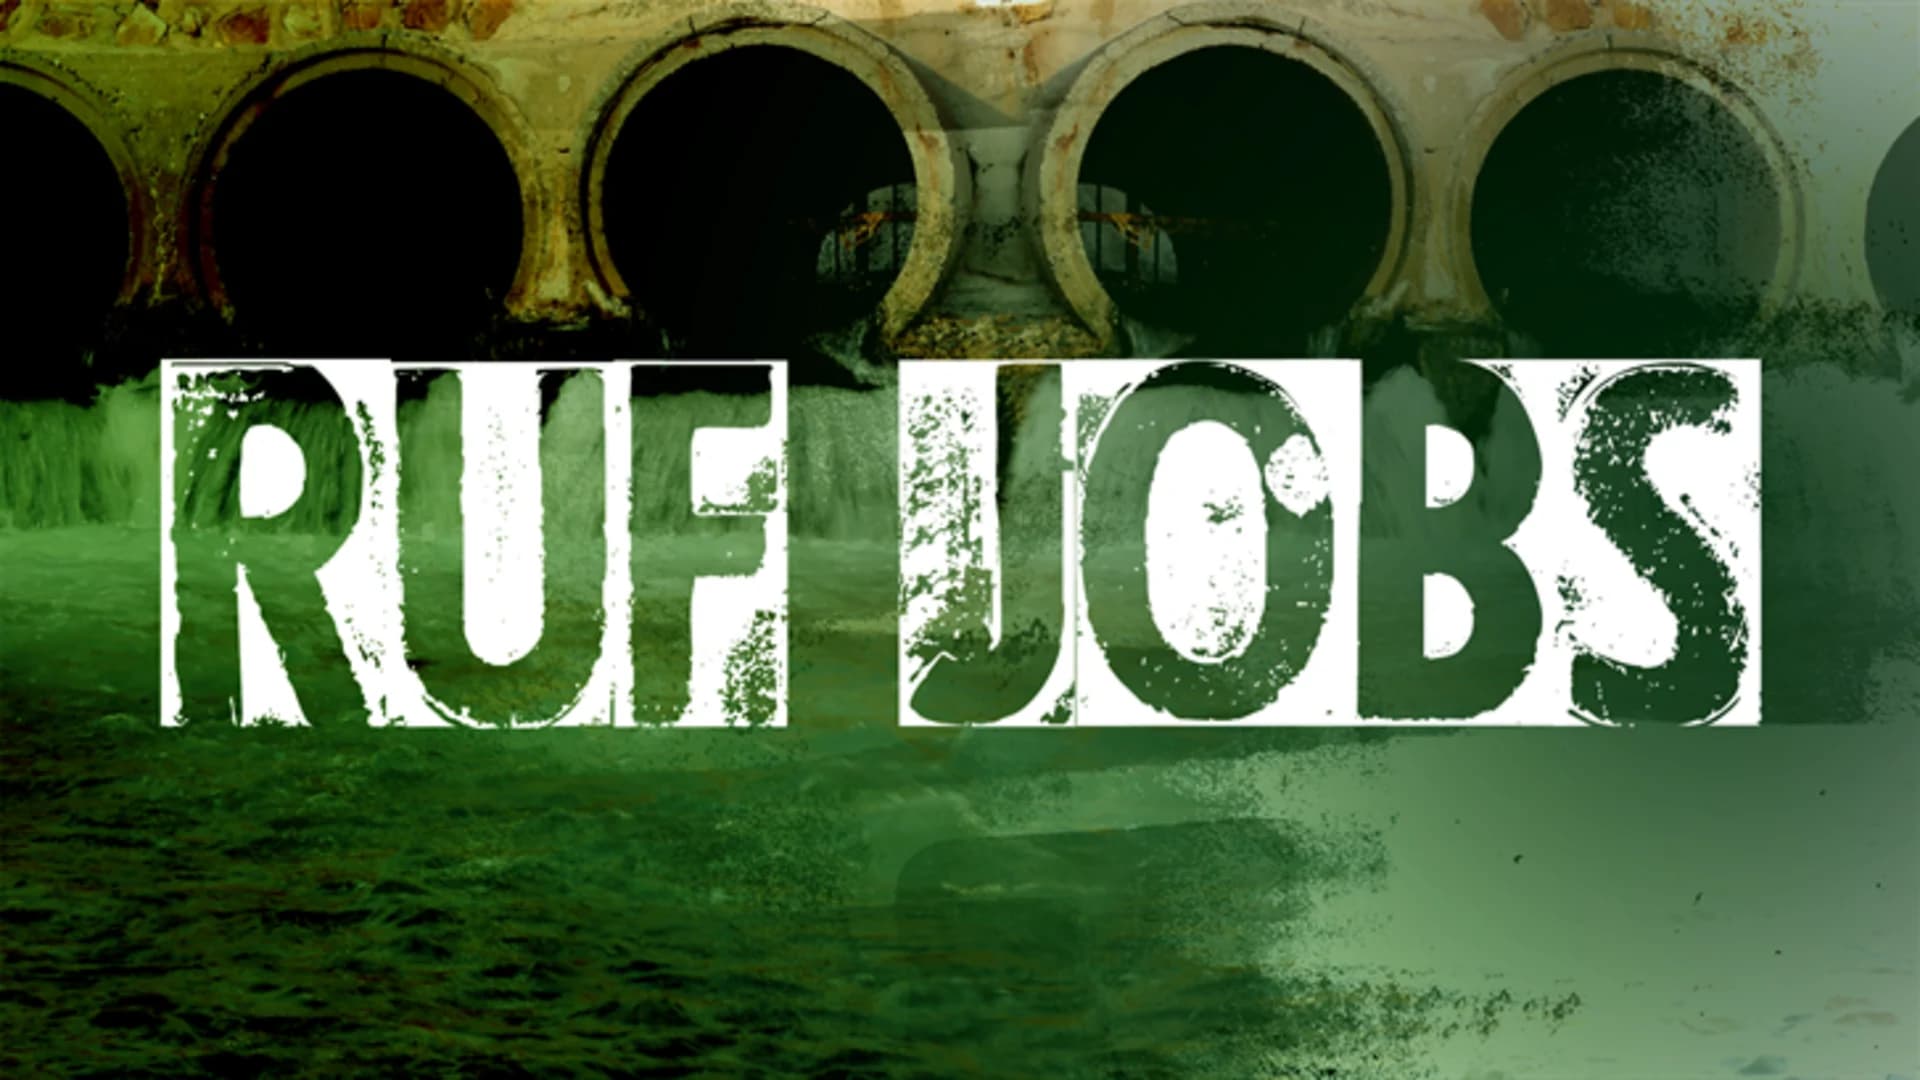 Do you have a Ruf Job? Tell us about it!